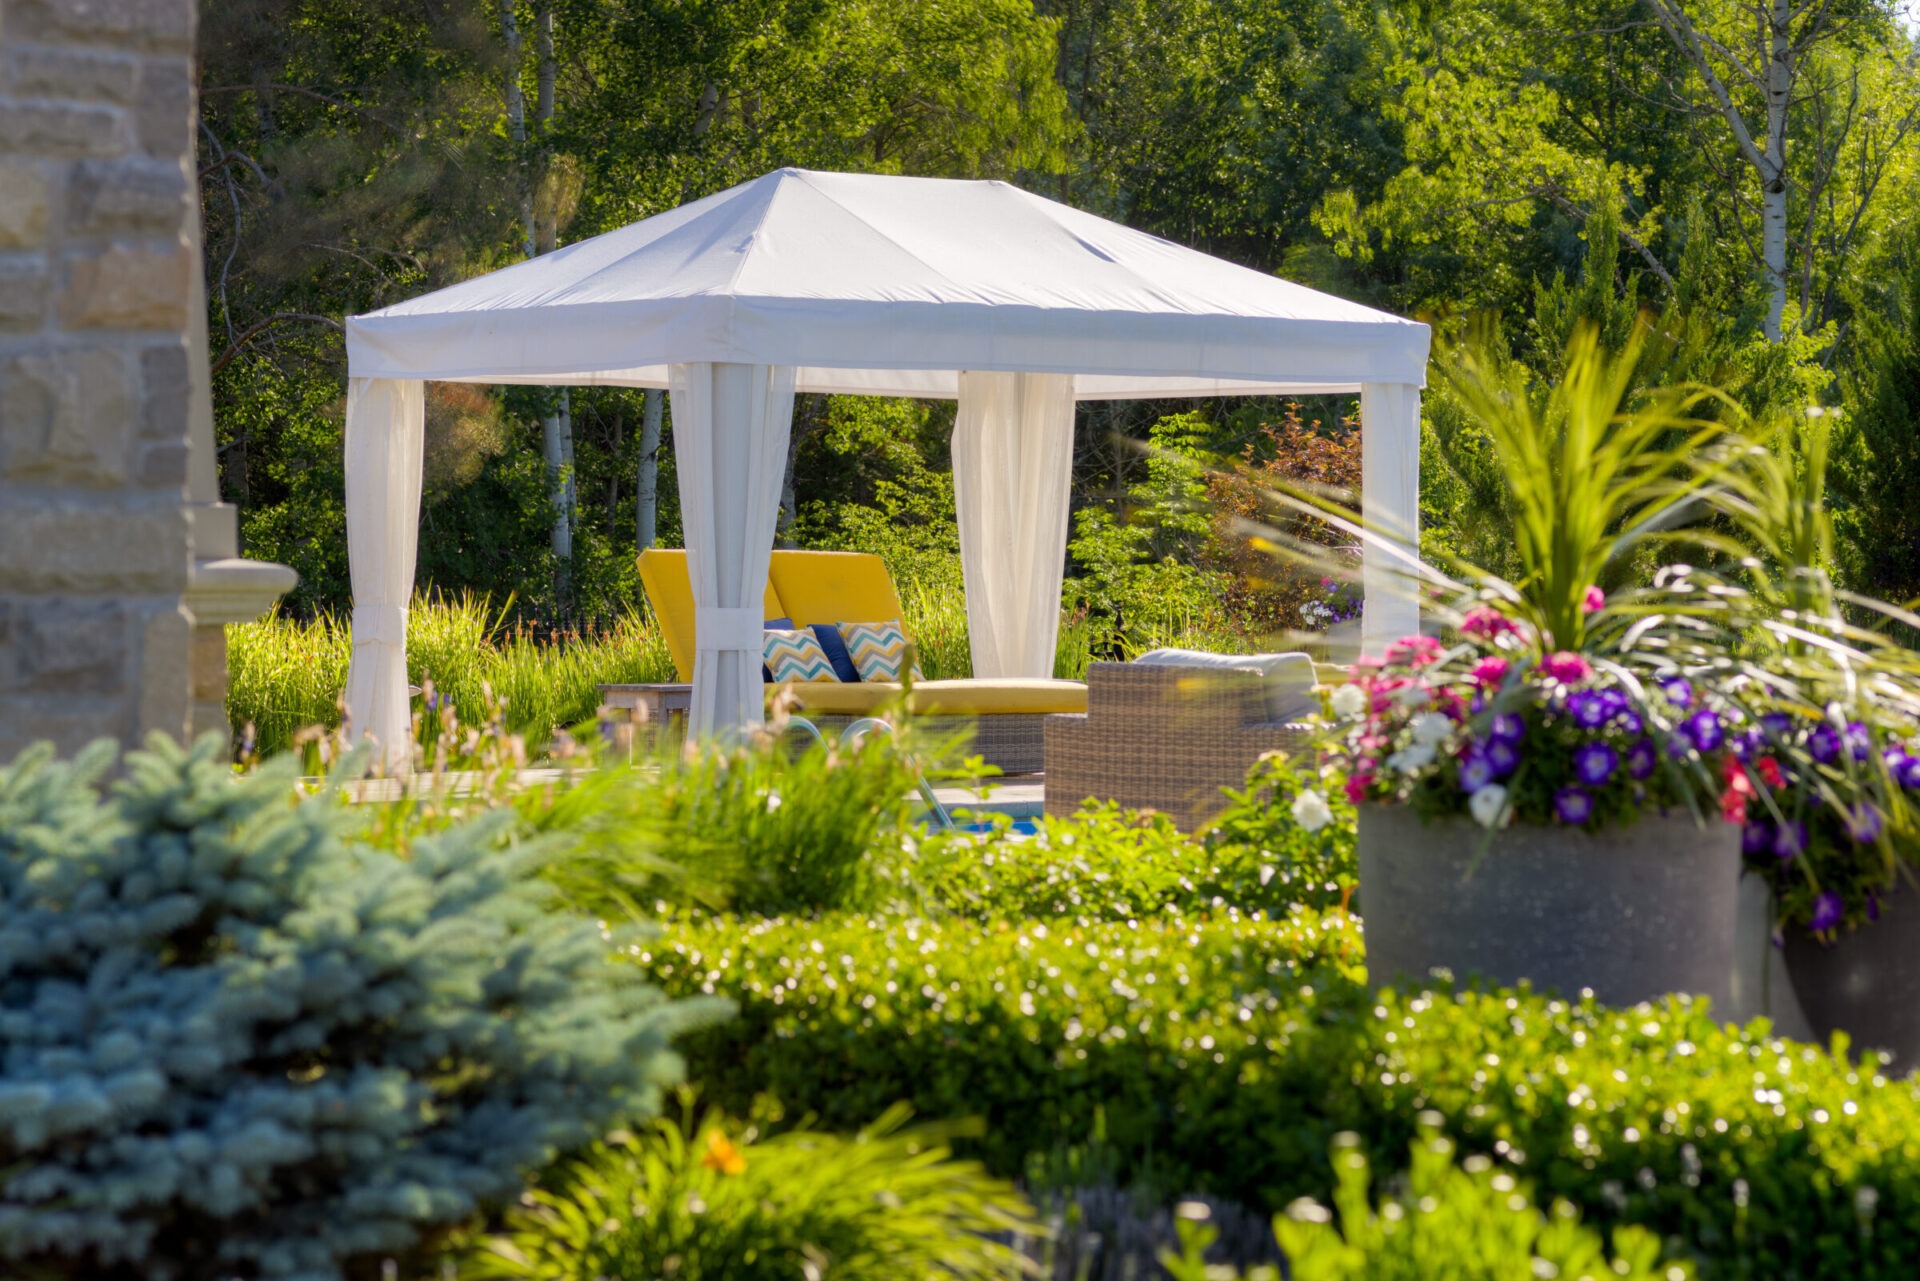 A serene garden with lush greenery featuring a white gazebo with yellow chairs, surrounded by vibrant flowering plants and shrubs in bright sunlight.